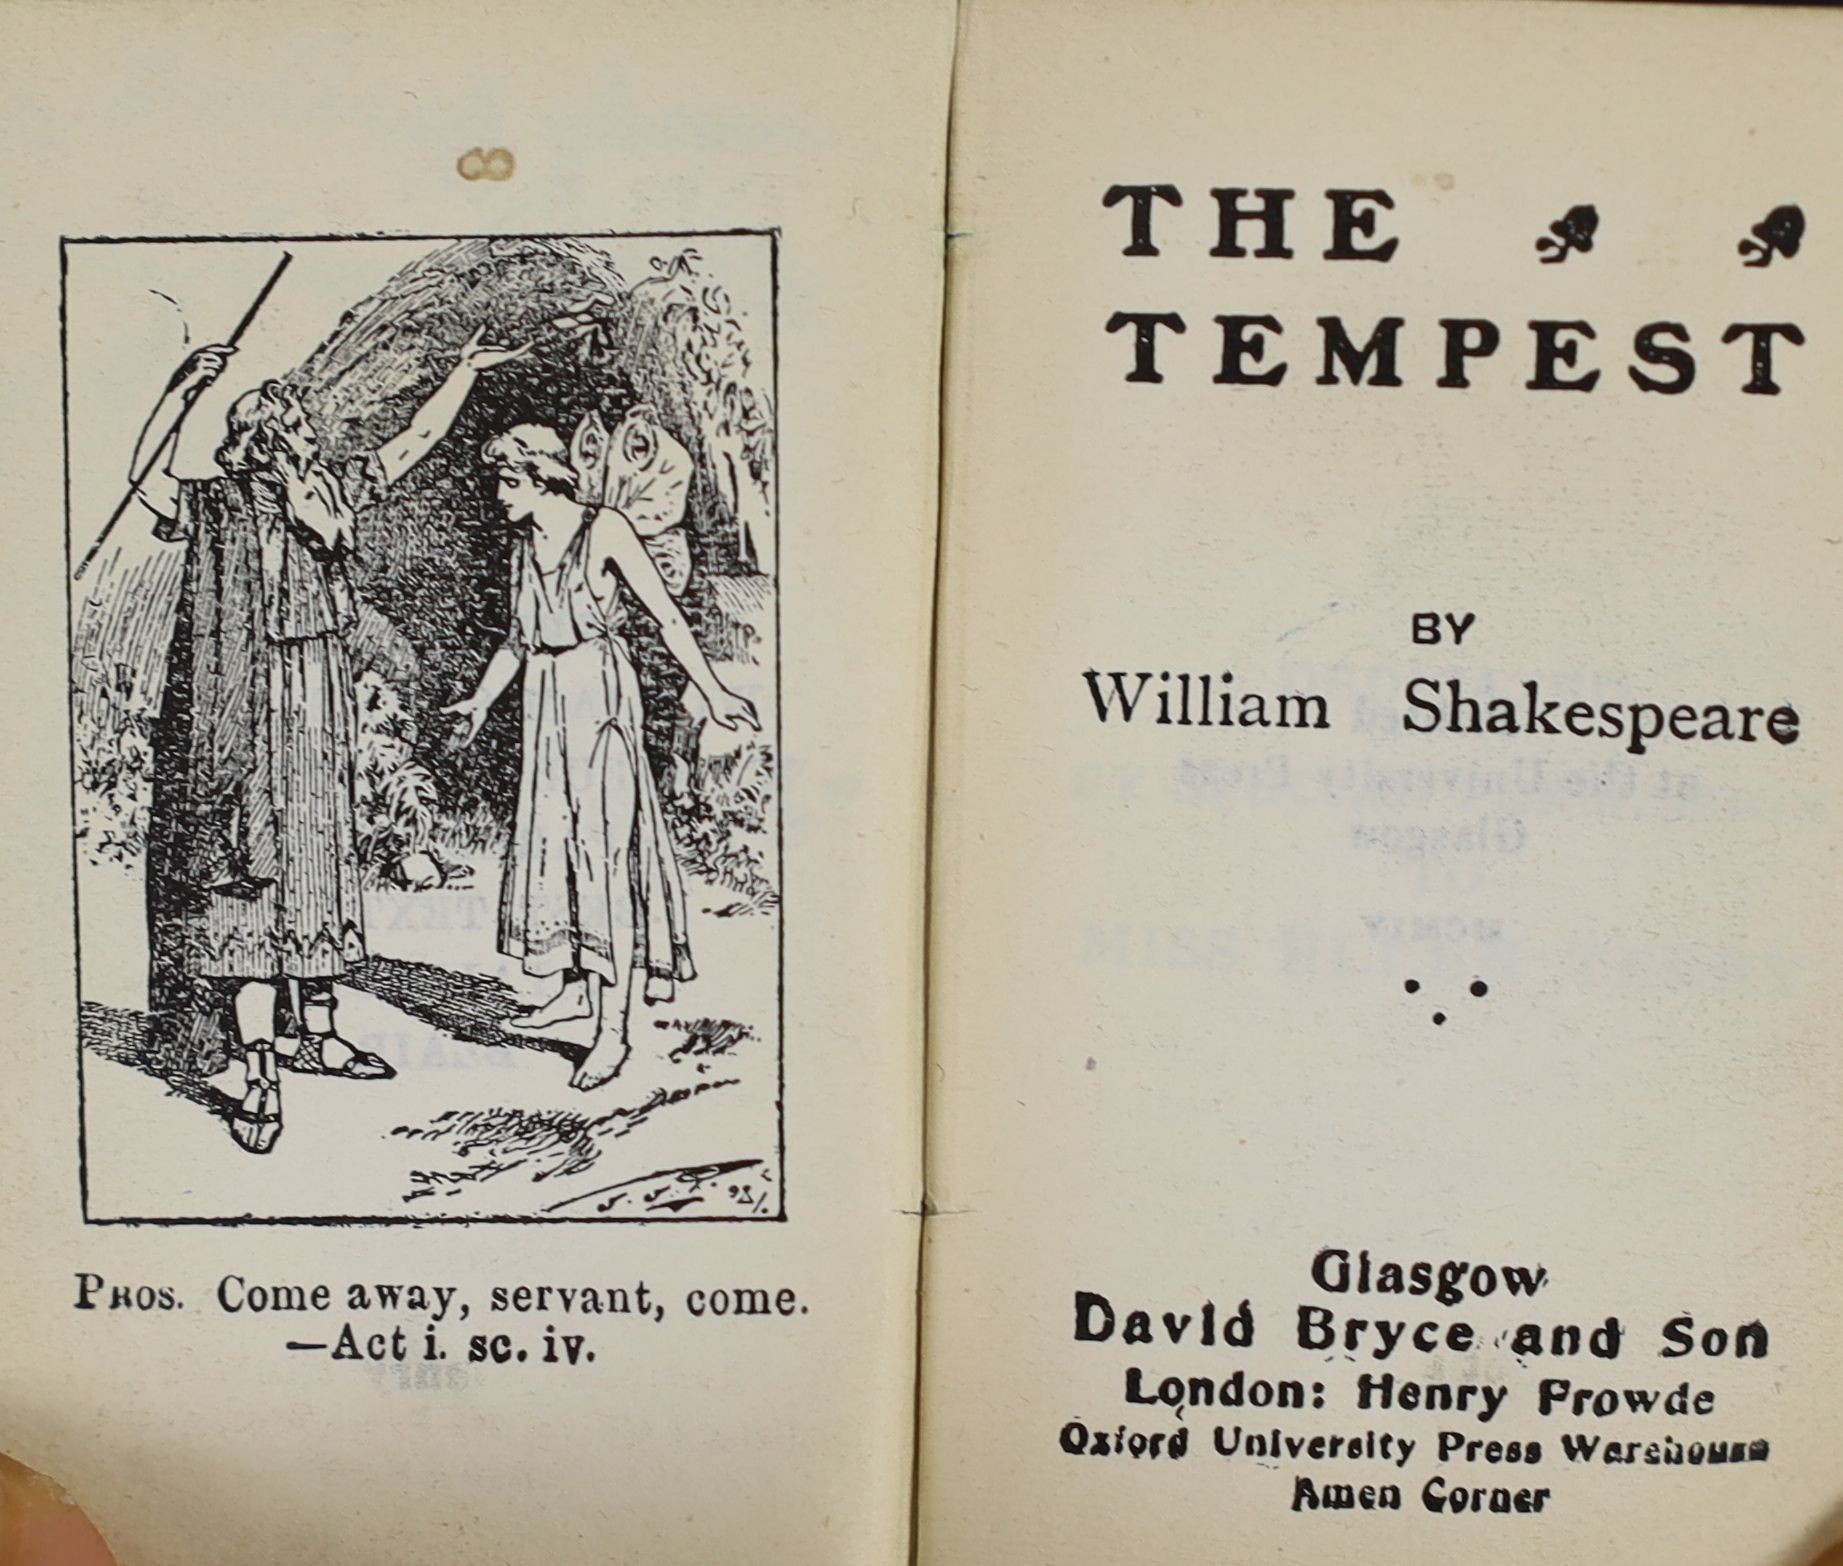 Miniature printing - Shakespeare, William - The Tempest, edited by J. Talfourd Blair, 53 x 33mm., with embossed silver cover, inscribed, ‘’William Shakespeare, David Bryce & Son, London,1904 and The Holy Bible, 58 x 38mm